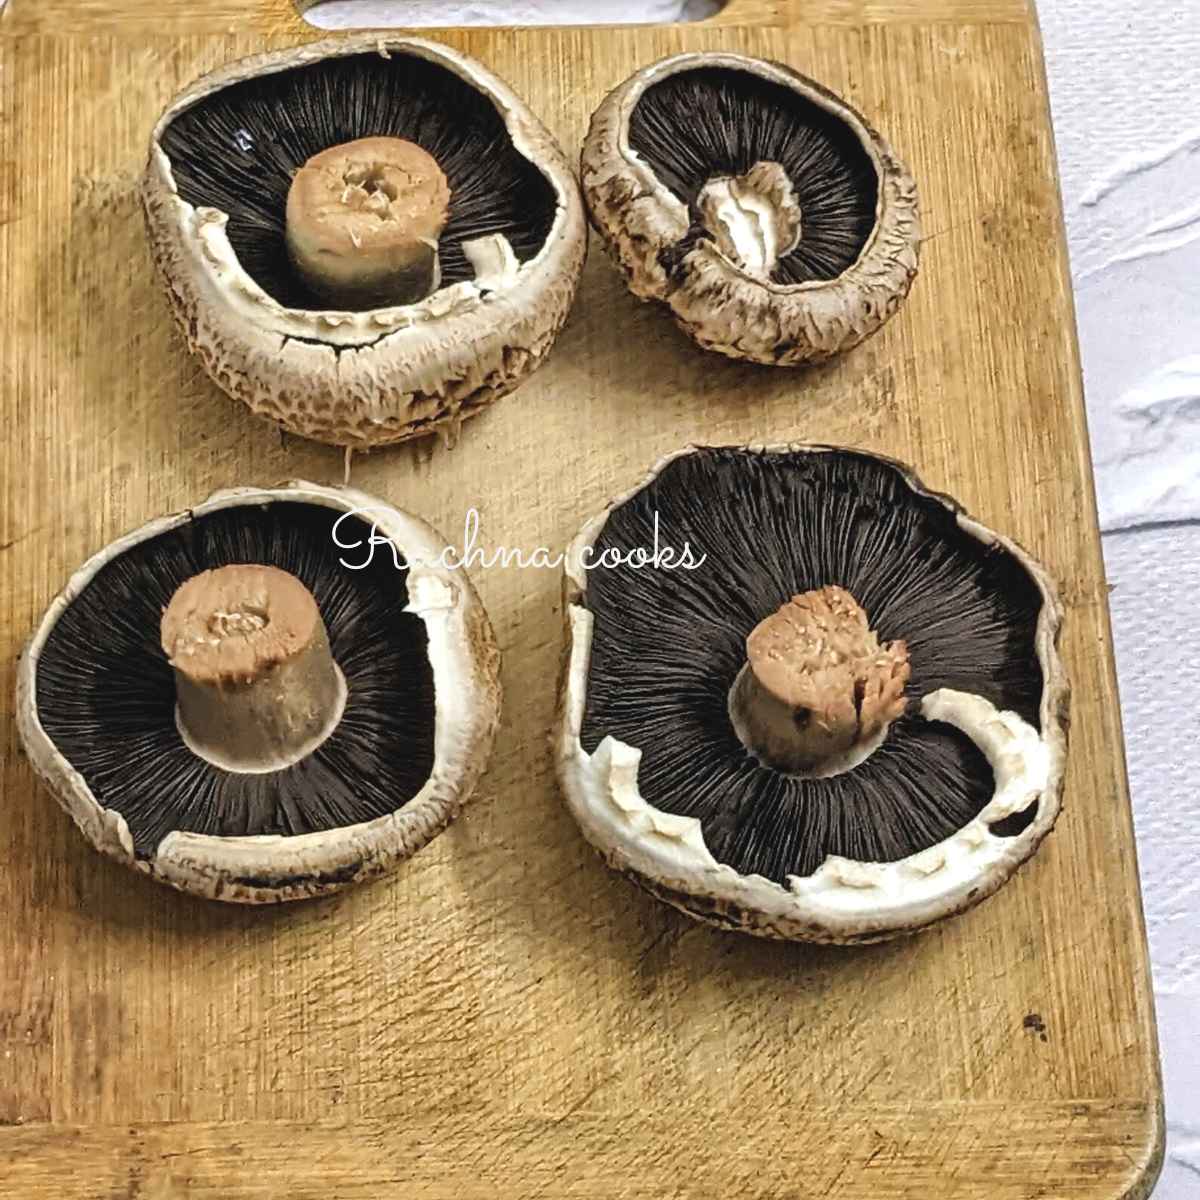 4 cleaned portobello mushrooms stalk side up on a chopping board.